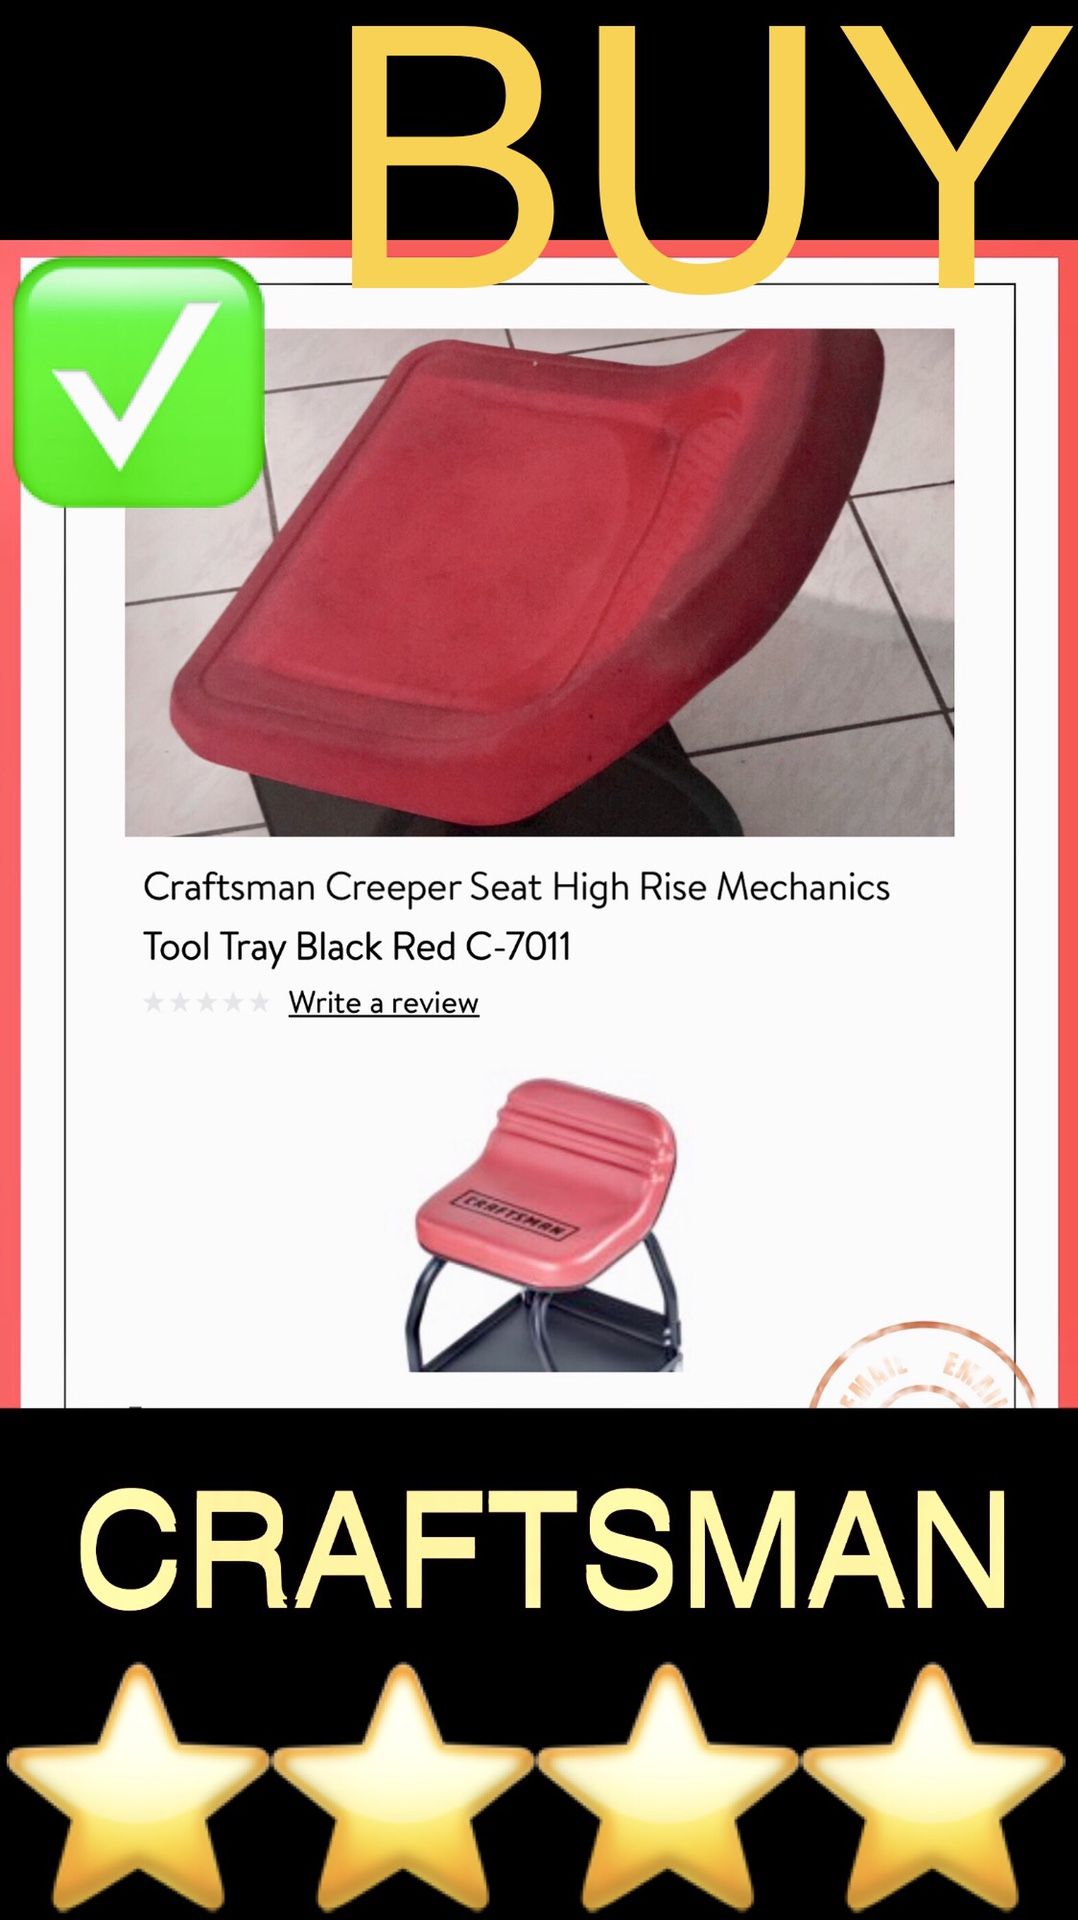 CRAFTSMAN creeper seat - rolling stool - high rise gliding mechanics swivel chair for garage - cash or trade 4 snap on drill or toolbox